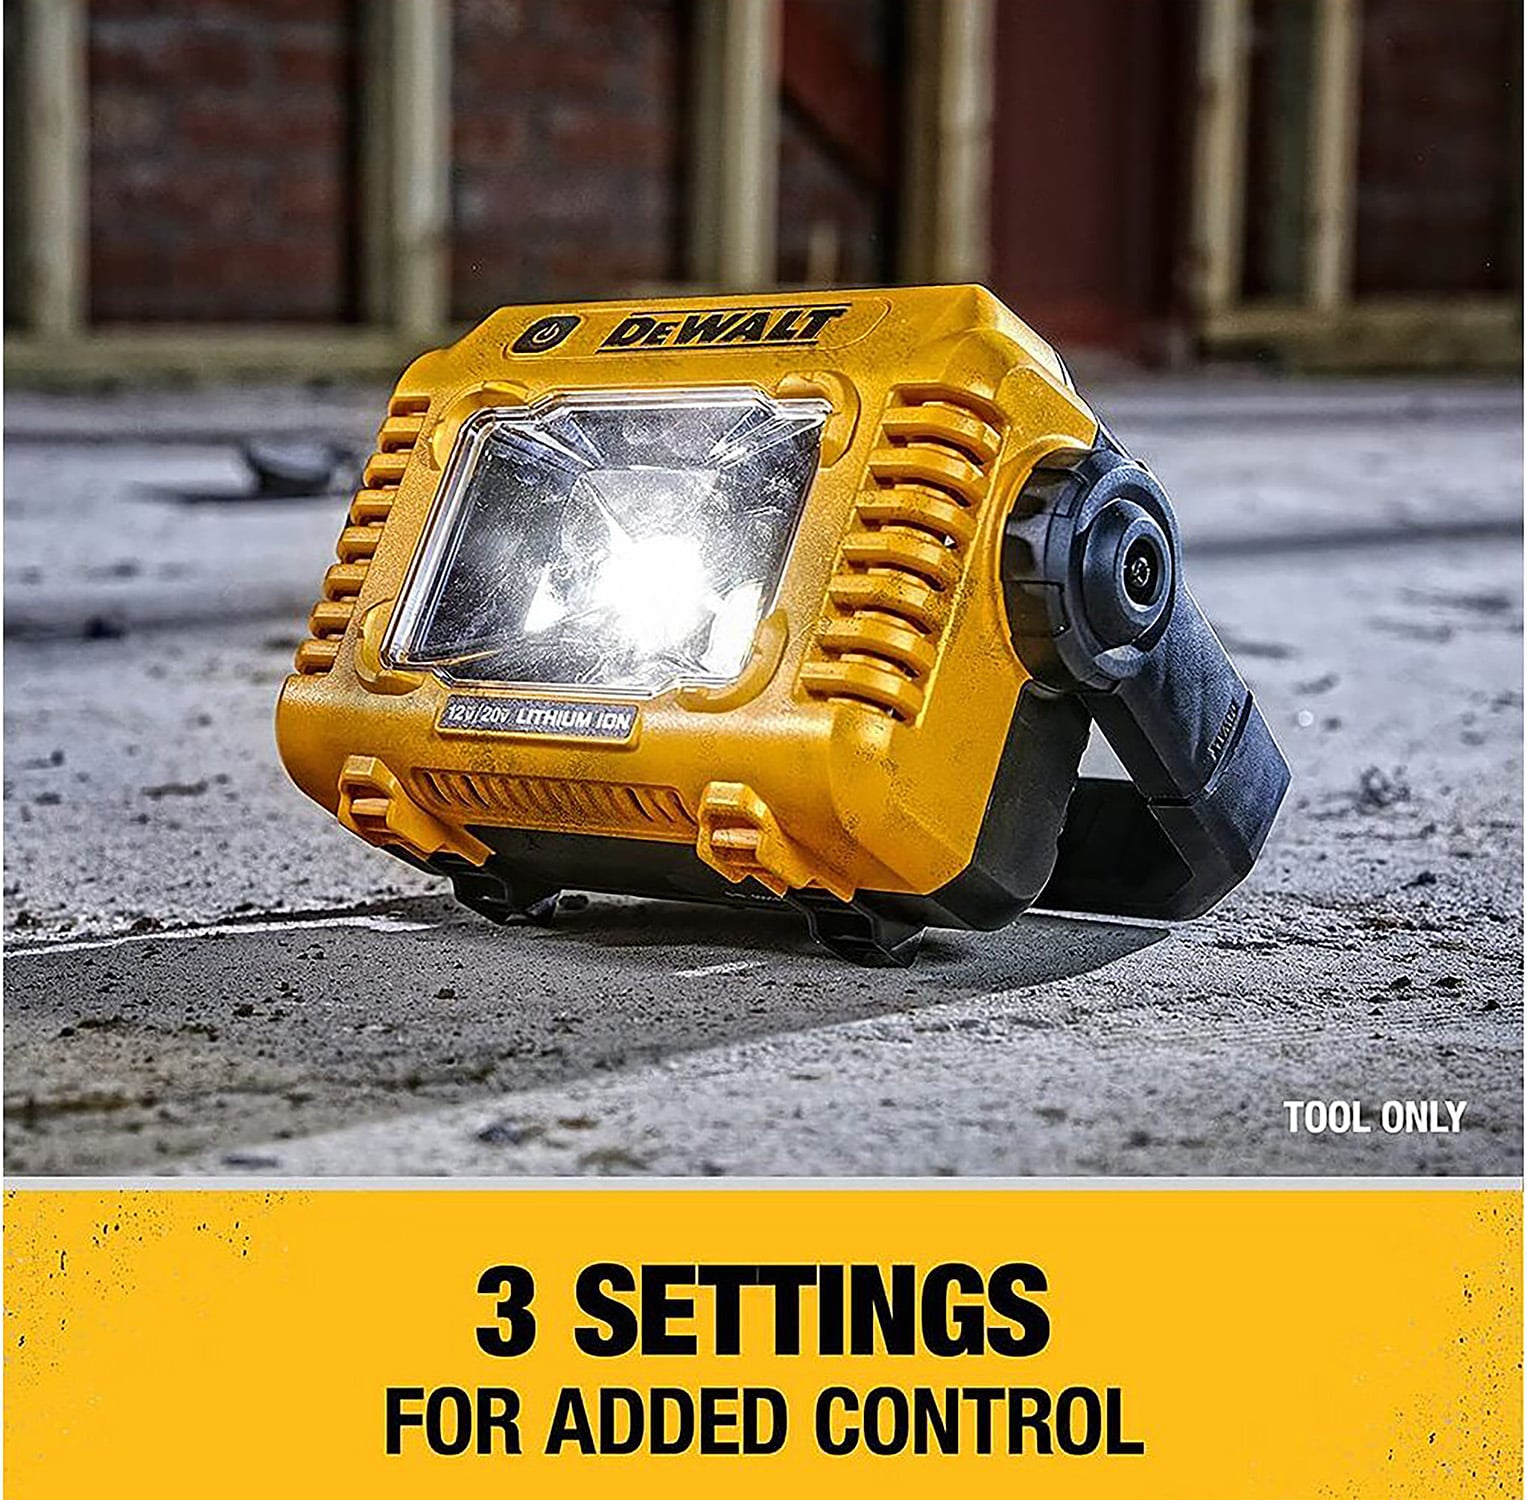 DEWALT 2000-Lumen LED Yellow Battery-operated Rechargeable